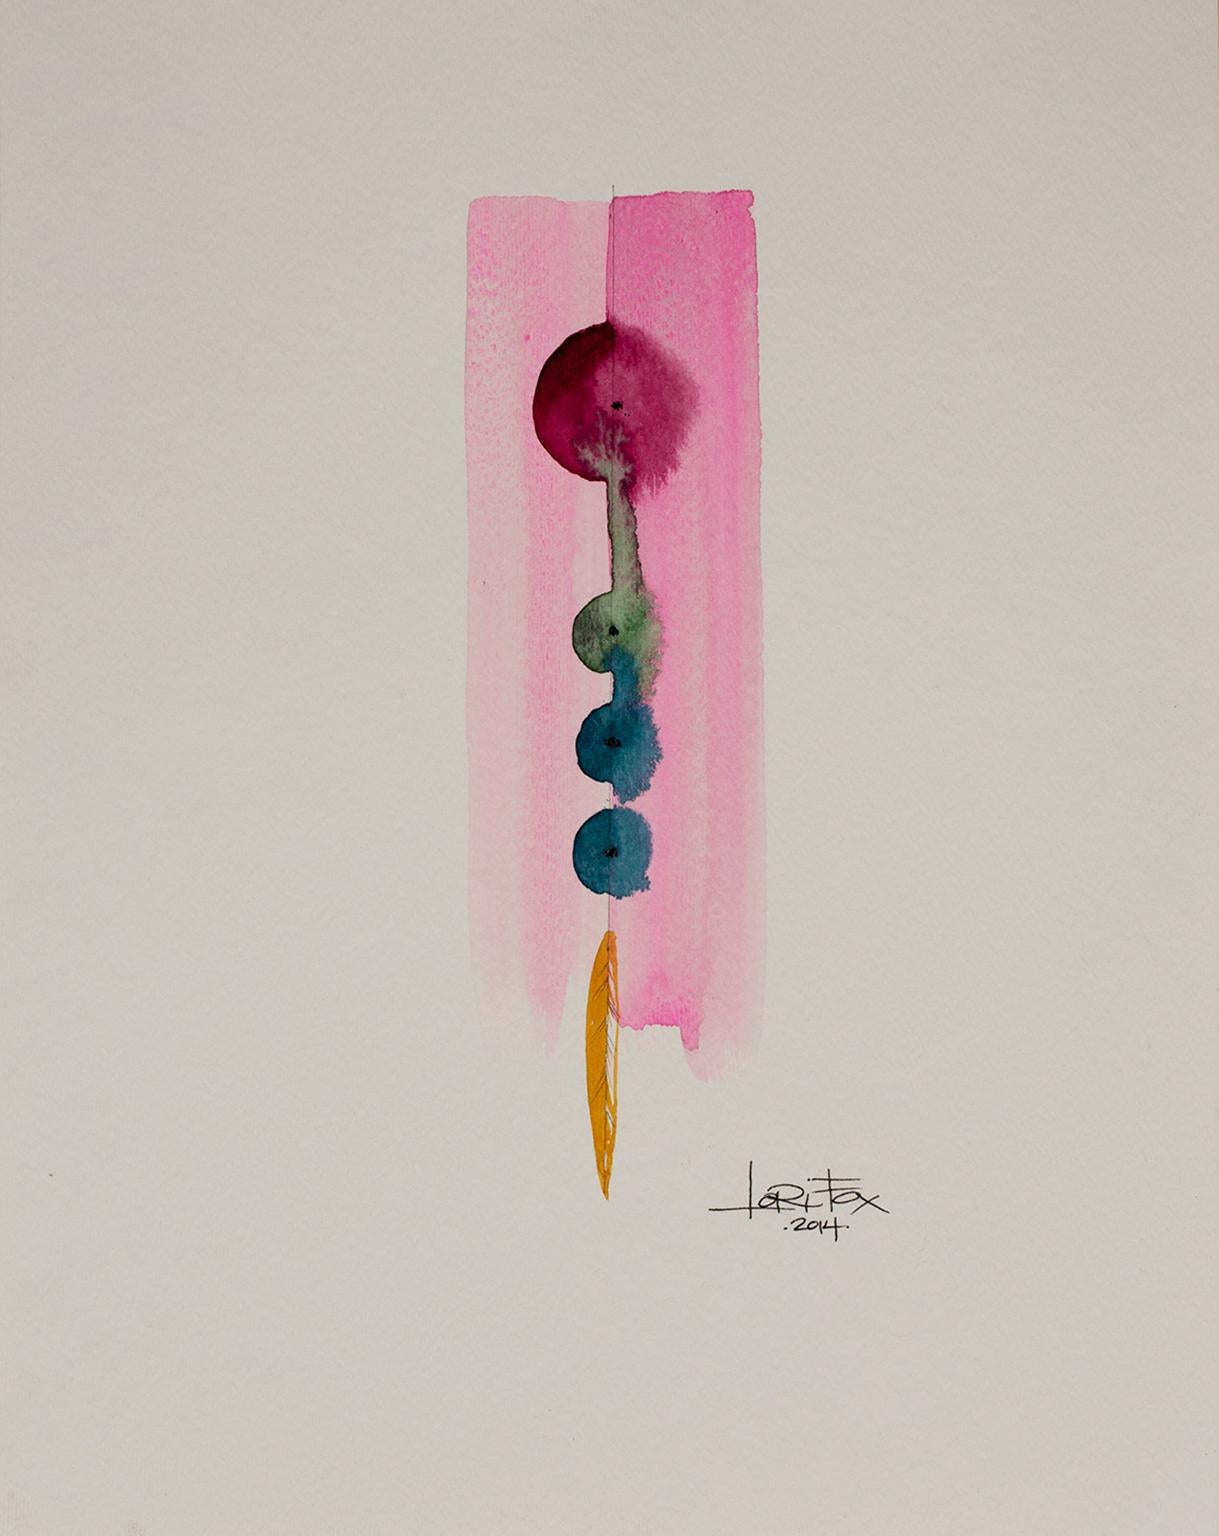 Totem 010, 2014 by Lori Fox
Watercolor and graphite on paper. 
14 x 11 inch unframed.  
Framed size is 15.25 x 12.25 x 1.75 inch (ask about framed price)
pink red blue black and yellow gold colors make this original from the Totem series by Lori